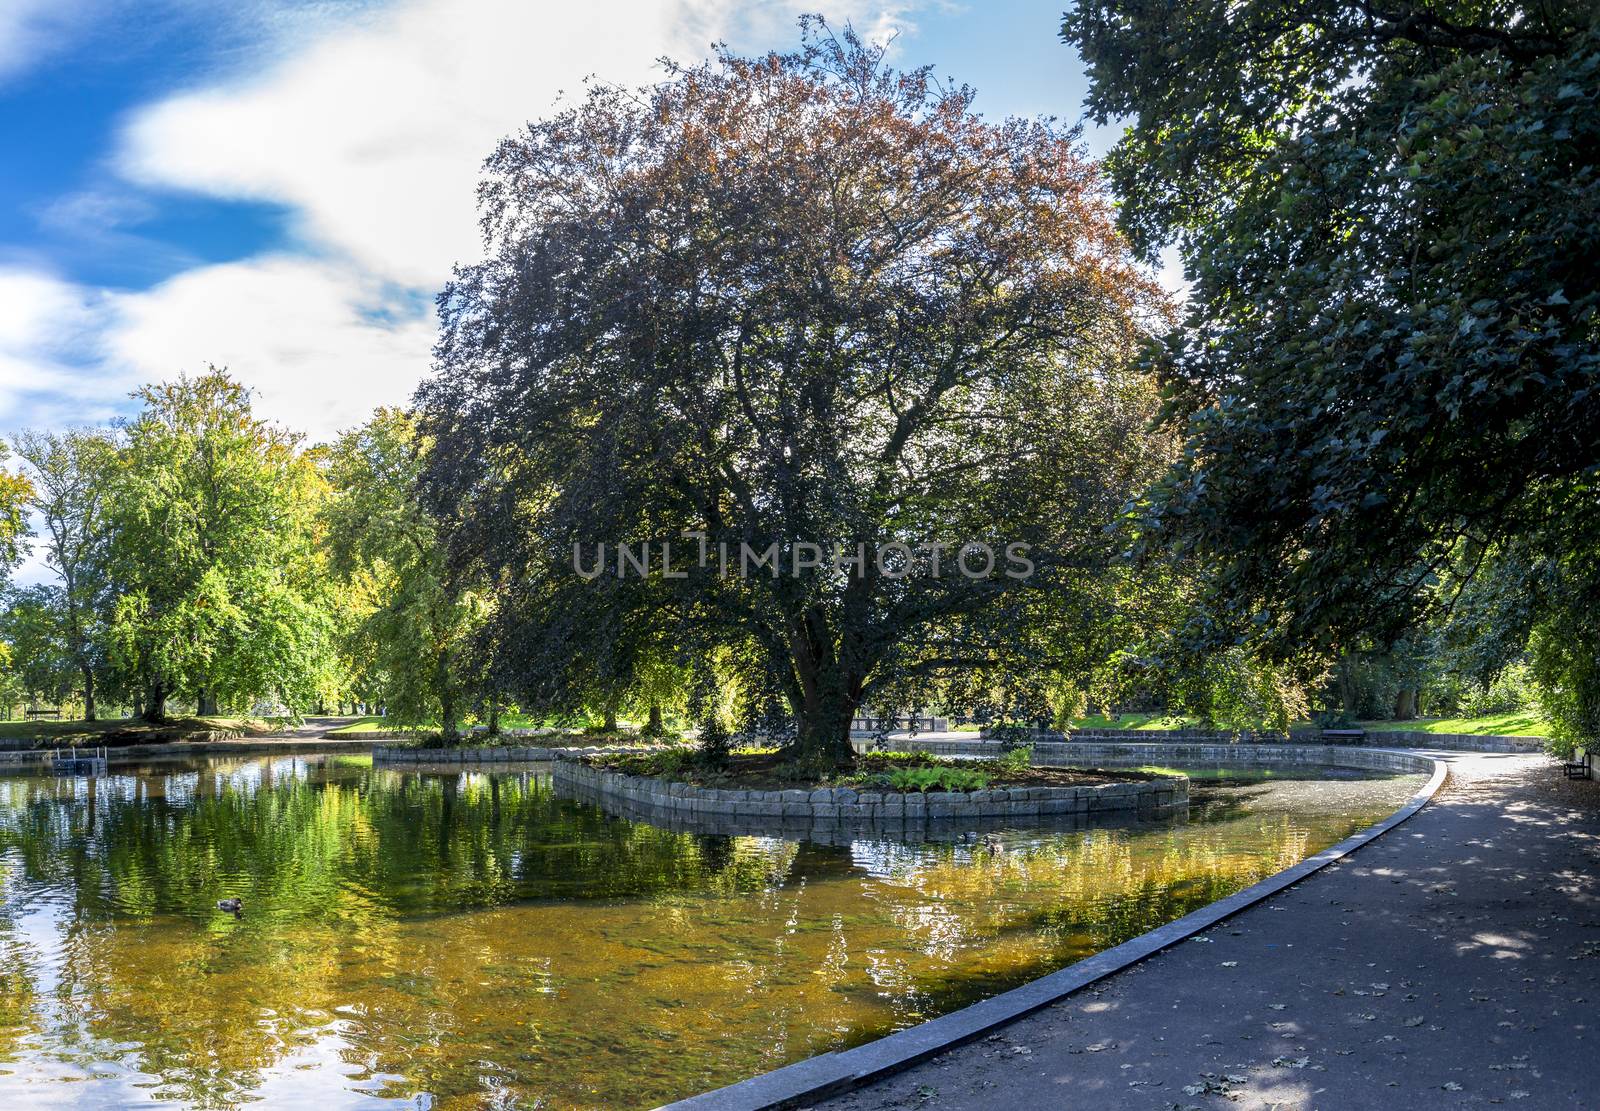 A view of a small shallow pond in the centre of Duthie Park, Aberdeen, Scotland